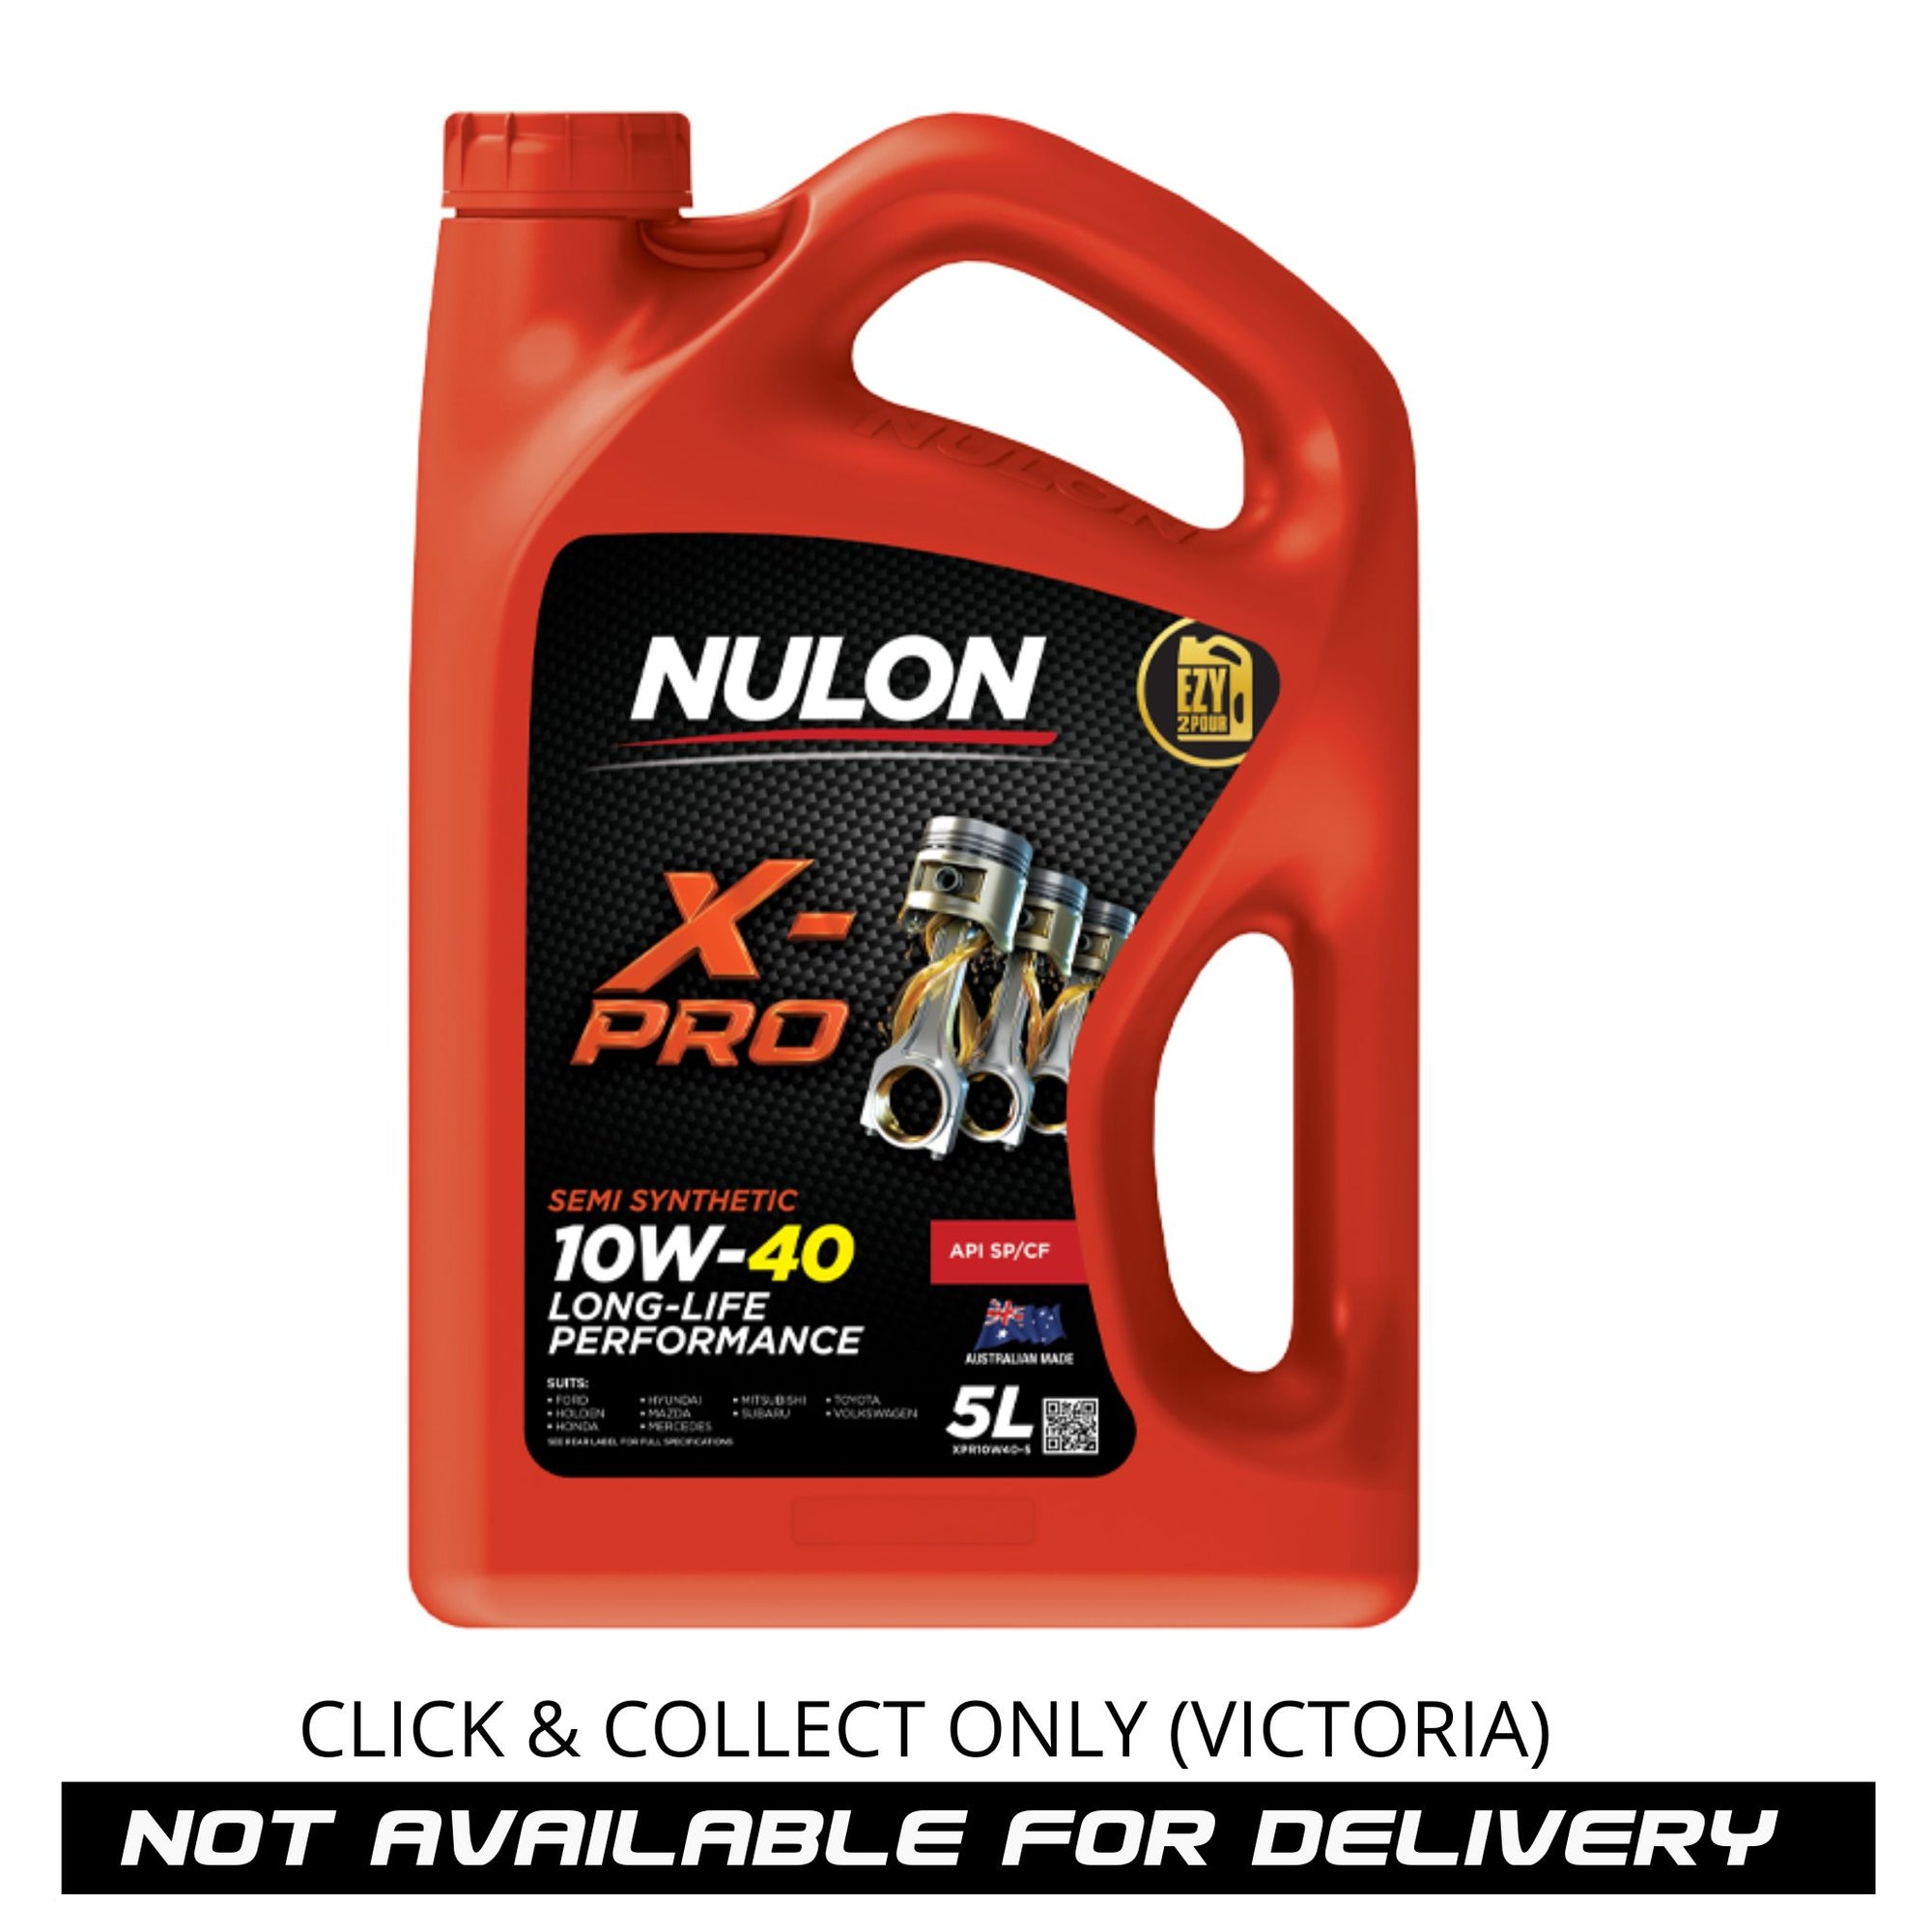 Nulon X-PRO 10W-40 LONG-LIFE PERFORMANCE - 5 Litres (XPR10W40) - South East Clearance Centre